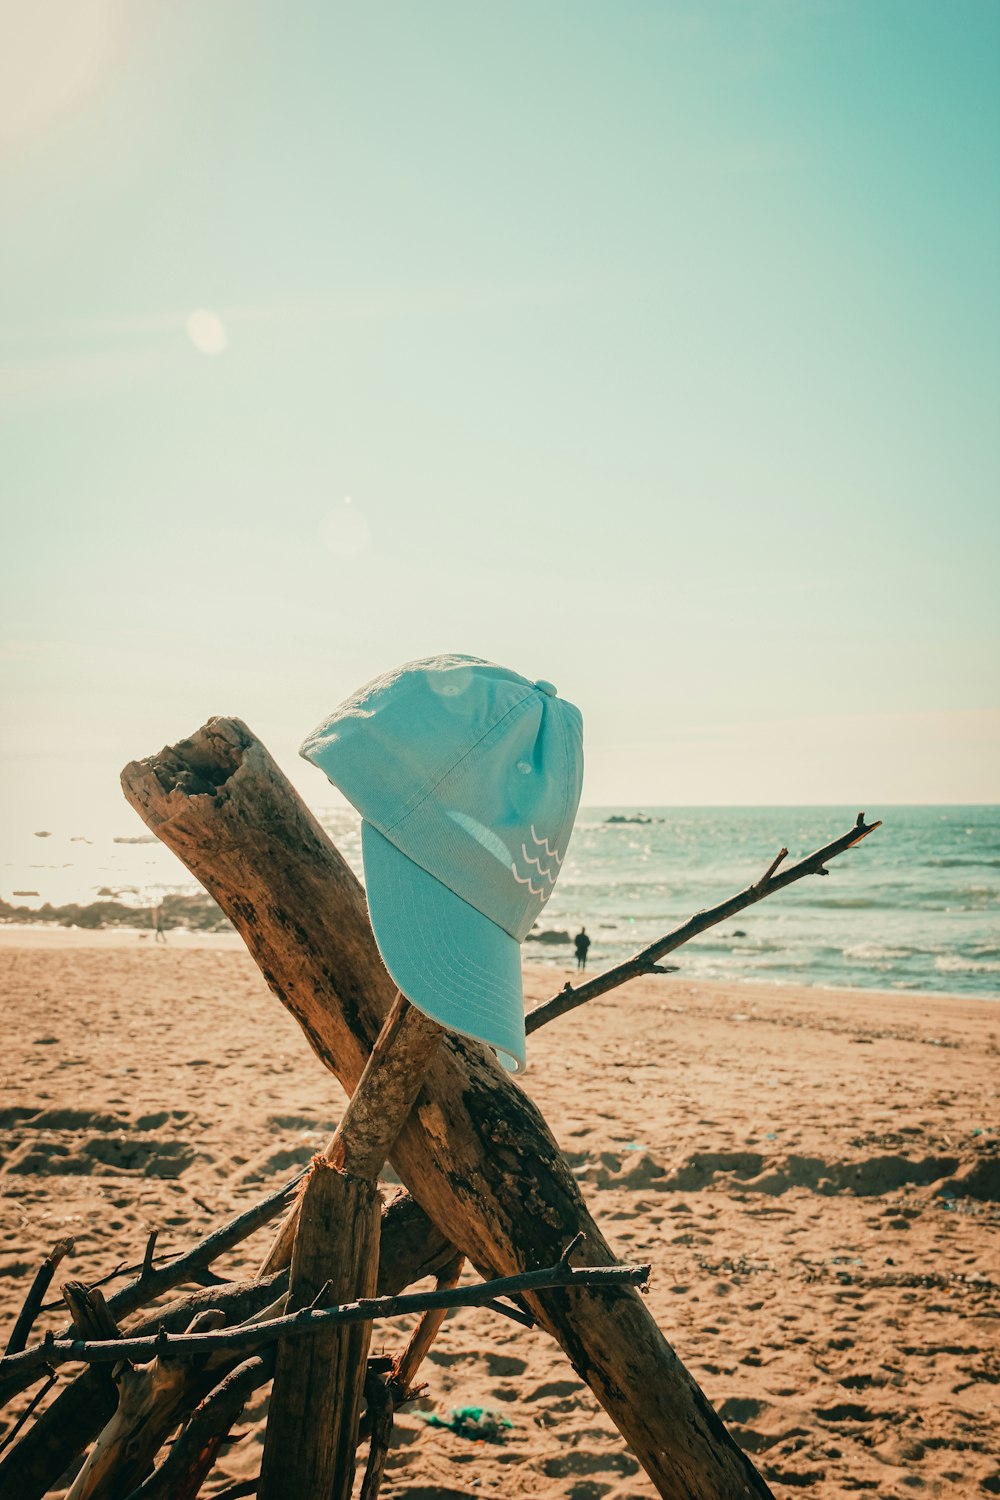 blue plastic bag on brown wooden log on beach during daytime